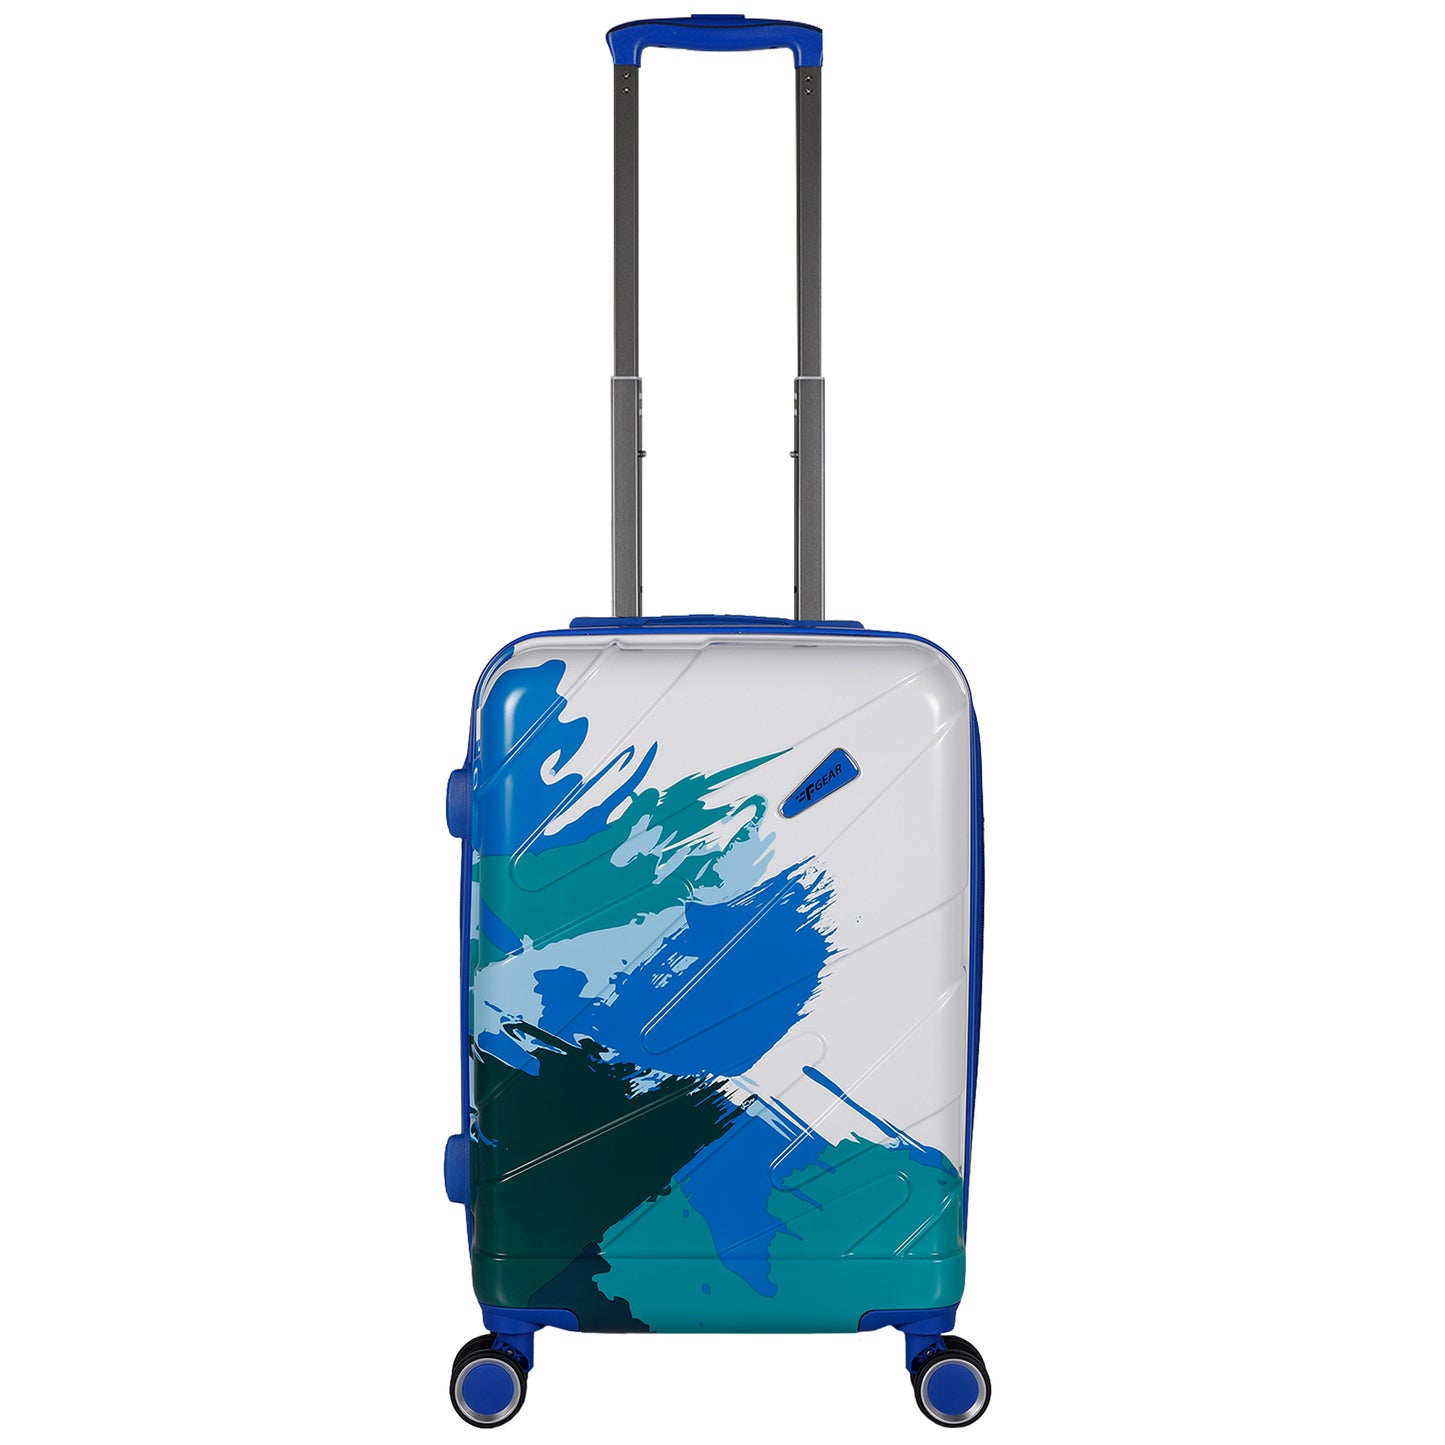 Picasso 20" Blue Expandable Cabin (Small) Suitcase